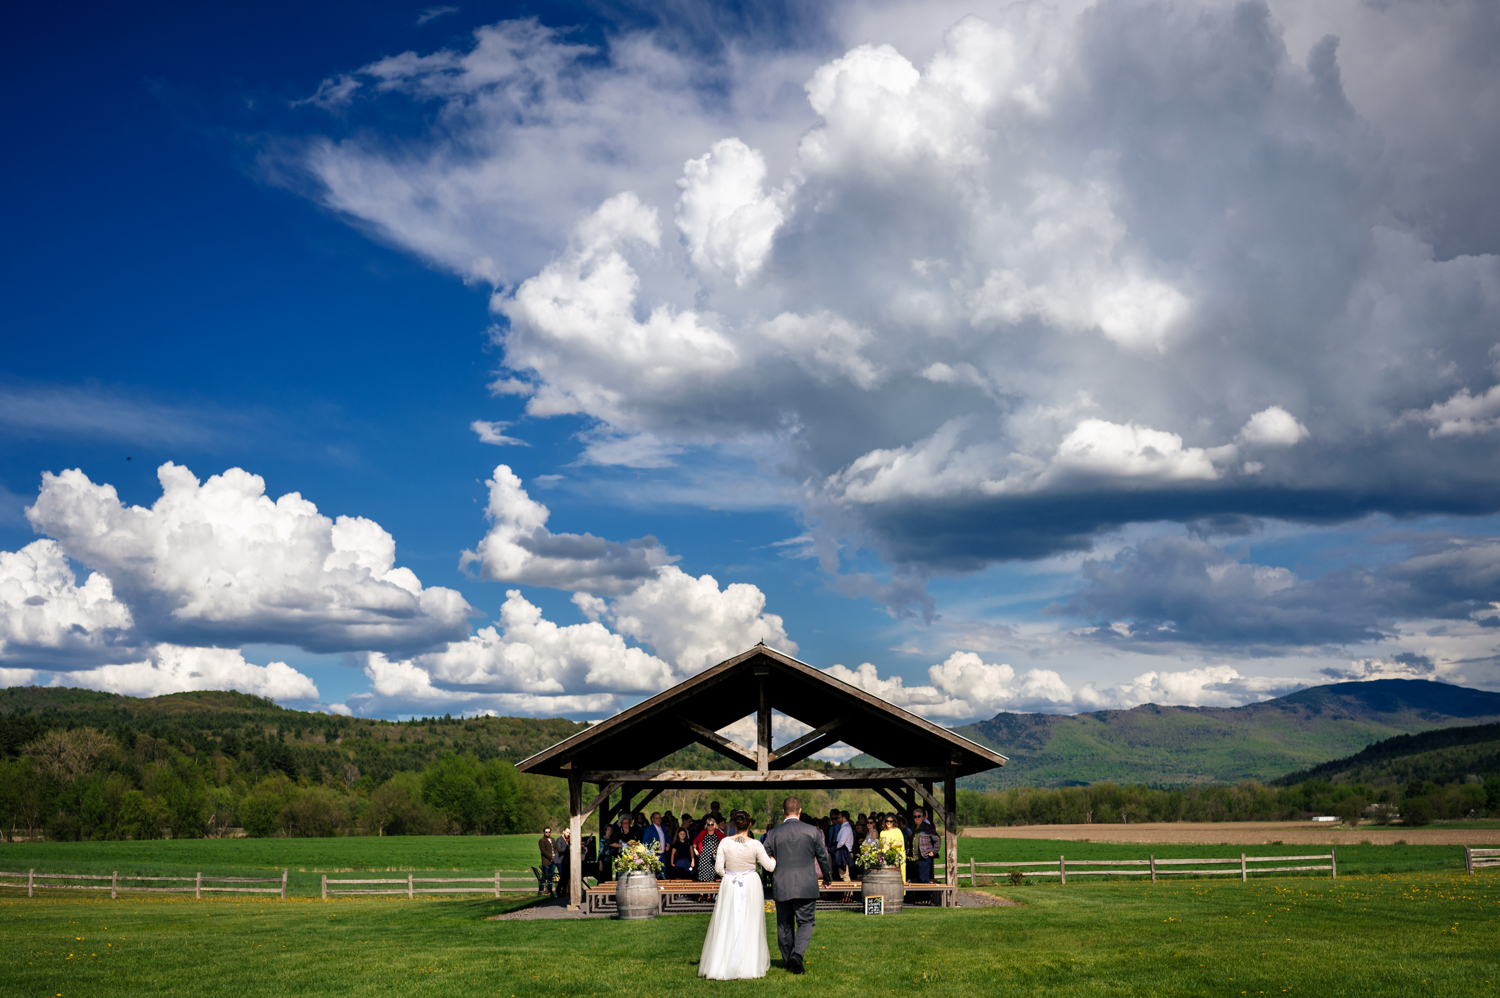 Anne walking to the alter at her outdoor wedding venue with mountain views in the background